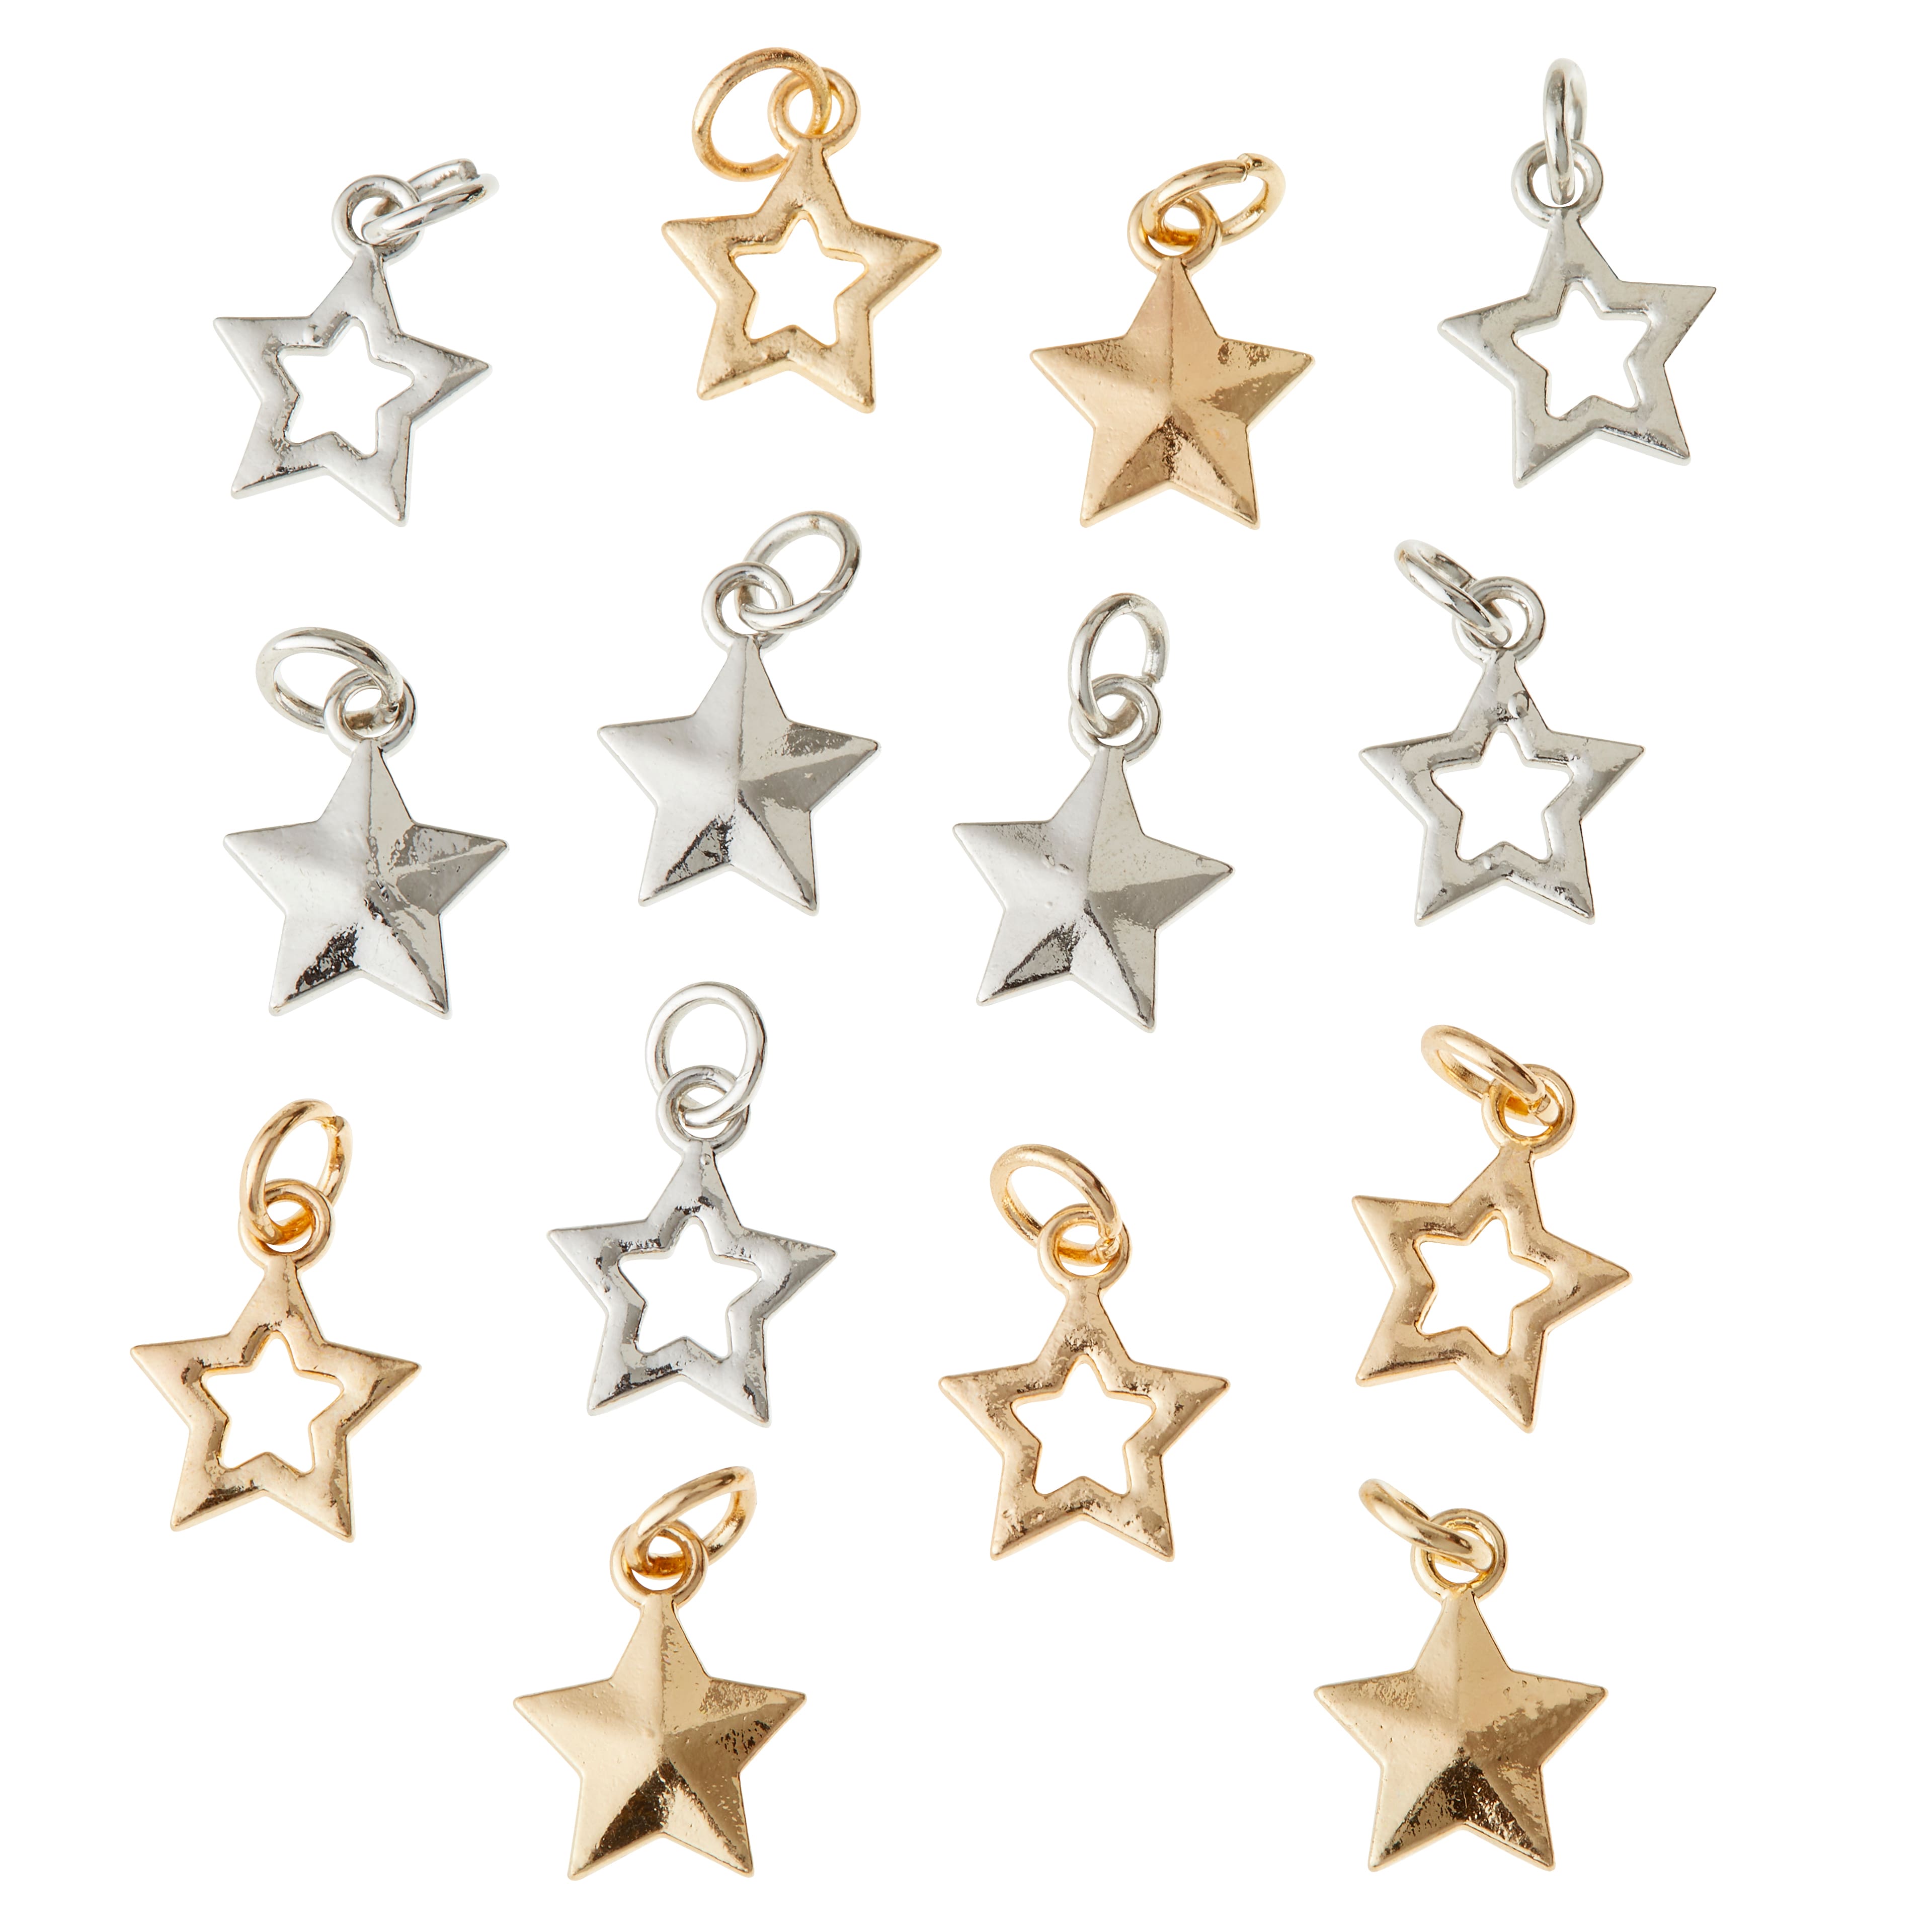 Bead Landing Charmalong Mixed Star Charms Value Pack - Each